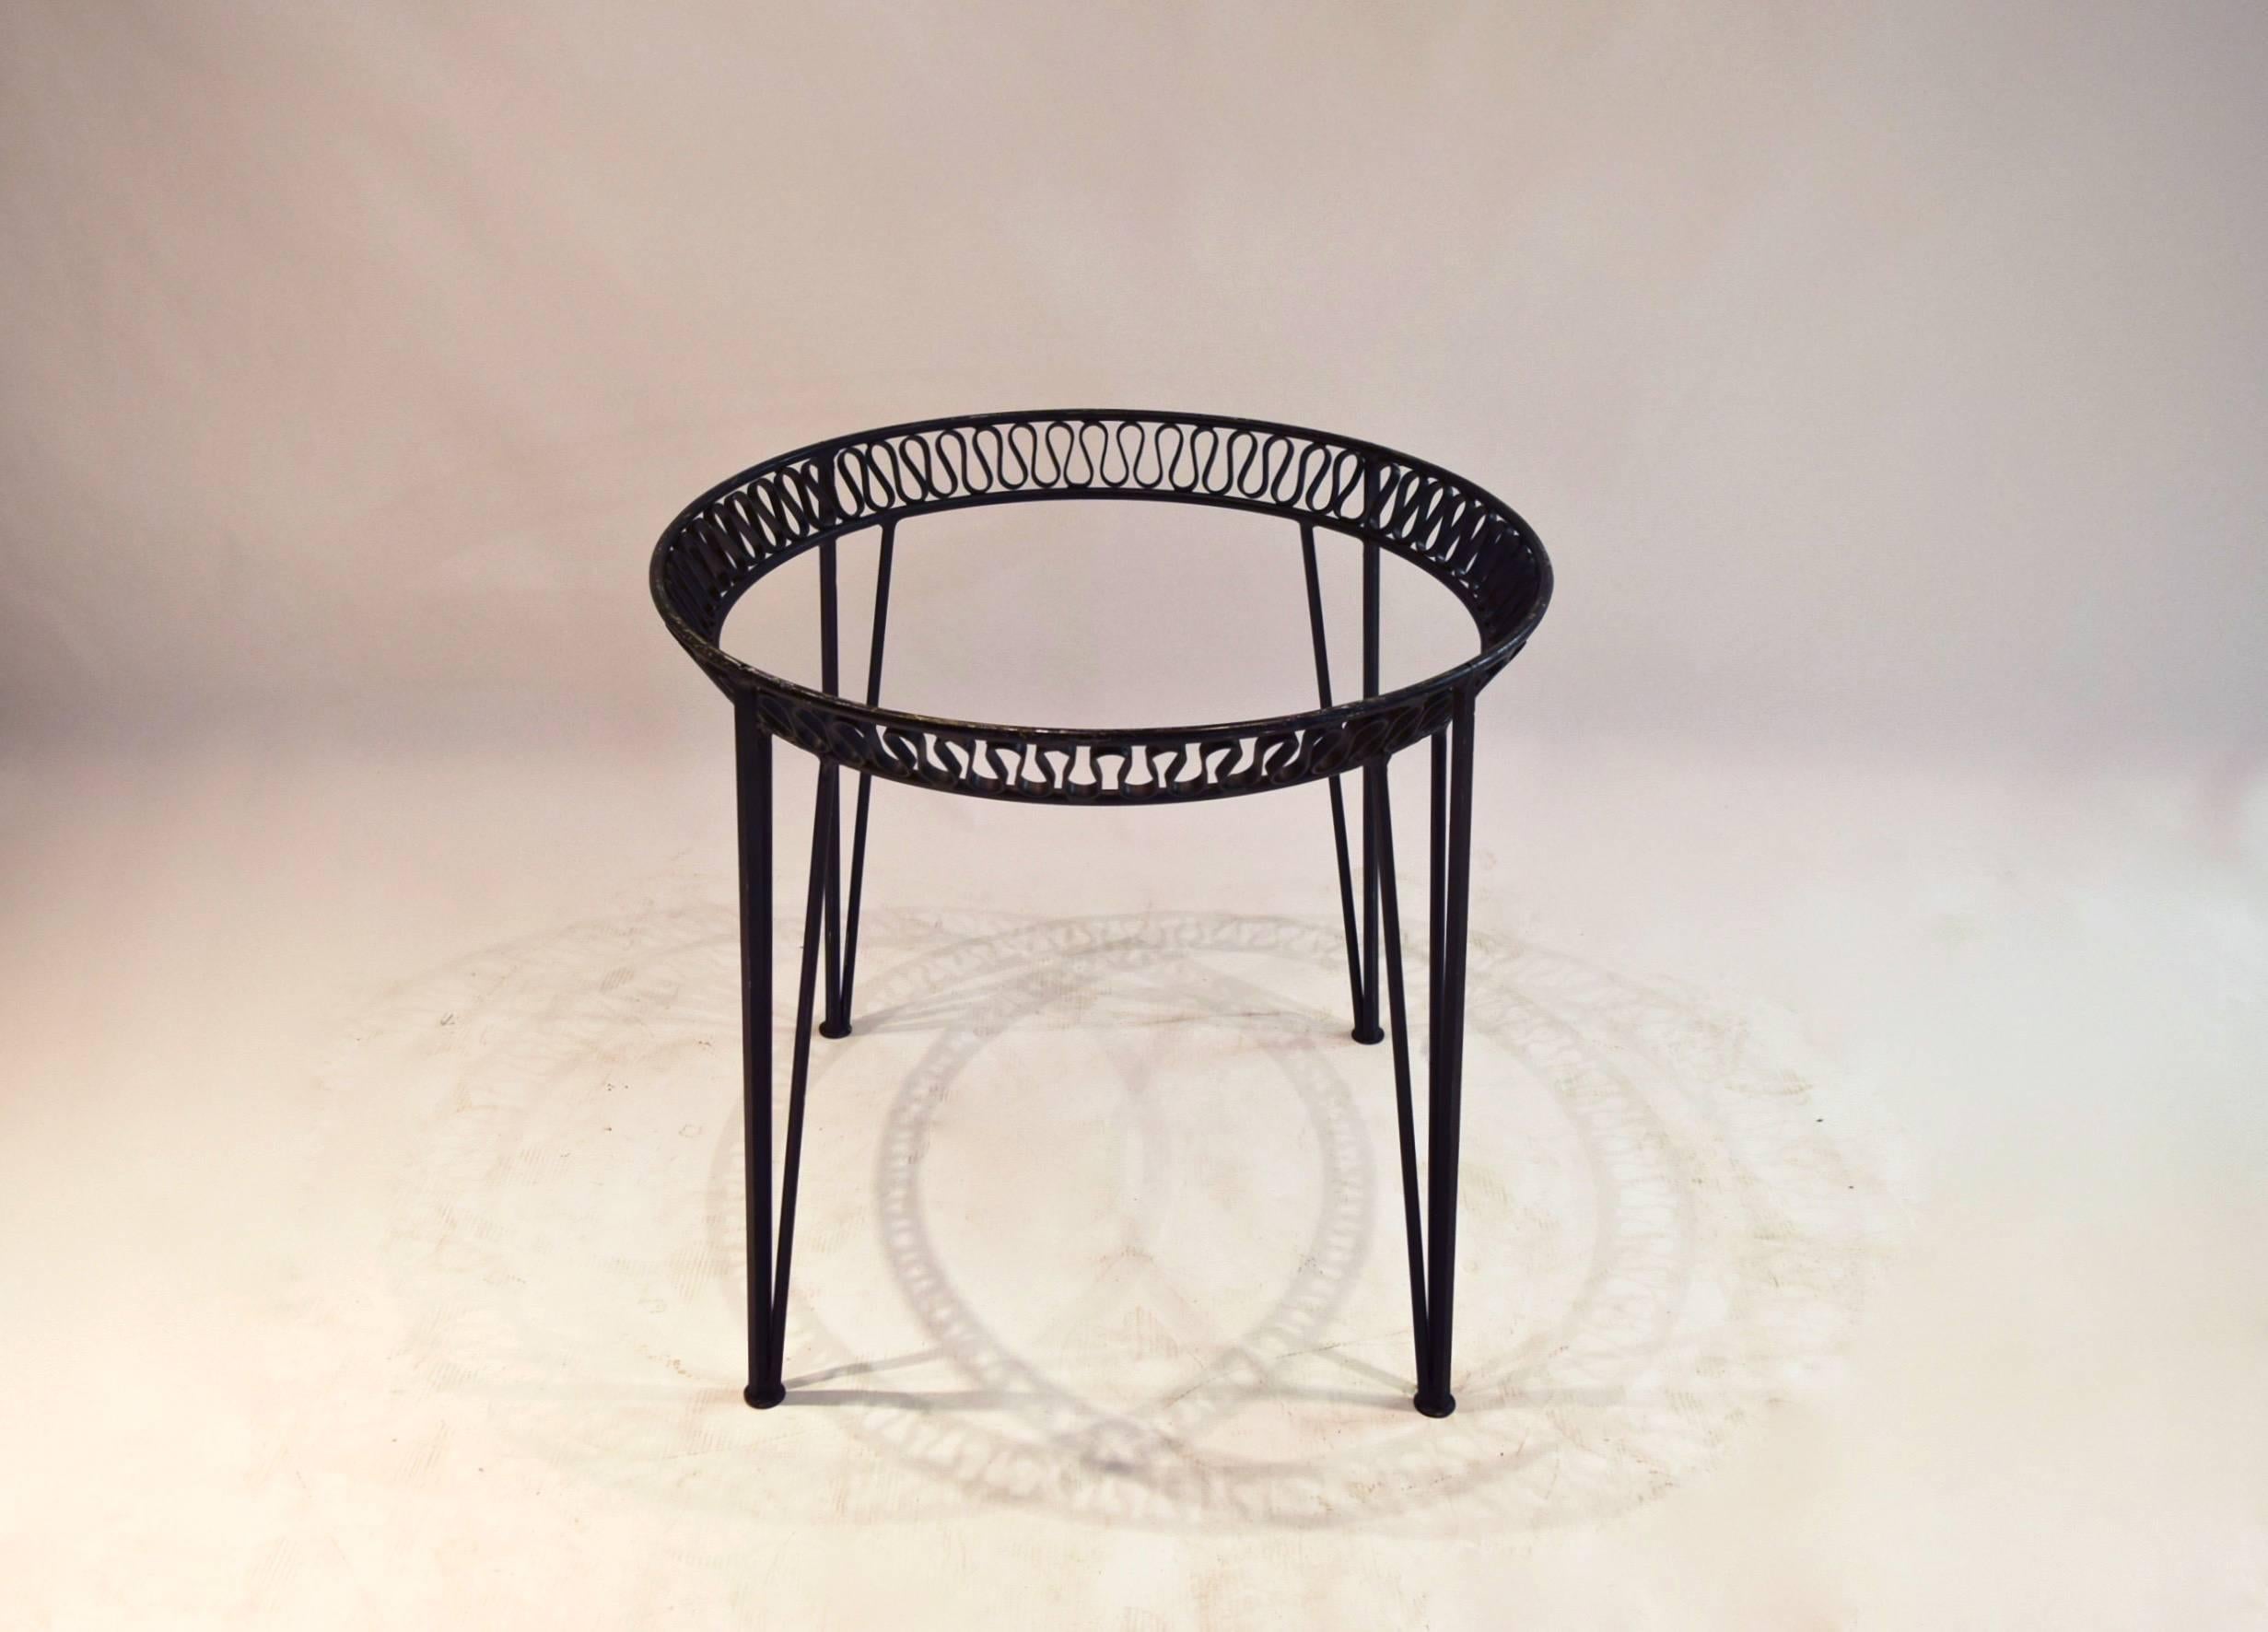 Black enameled metal round dining table from Salterini's 